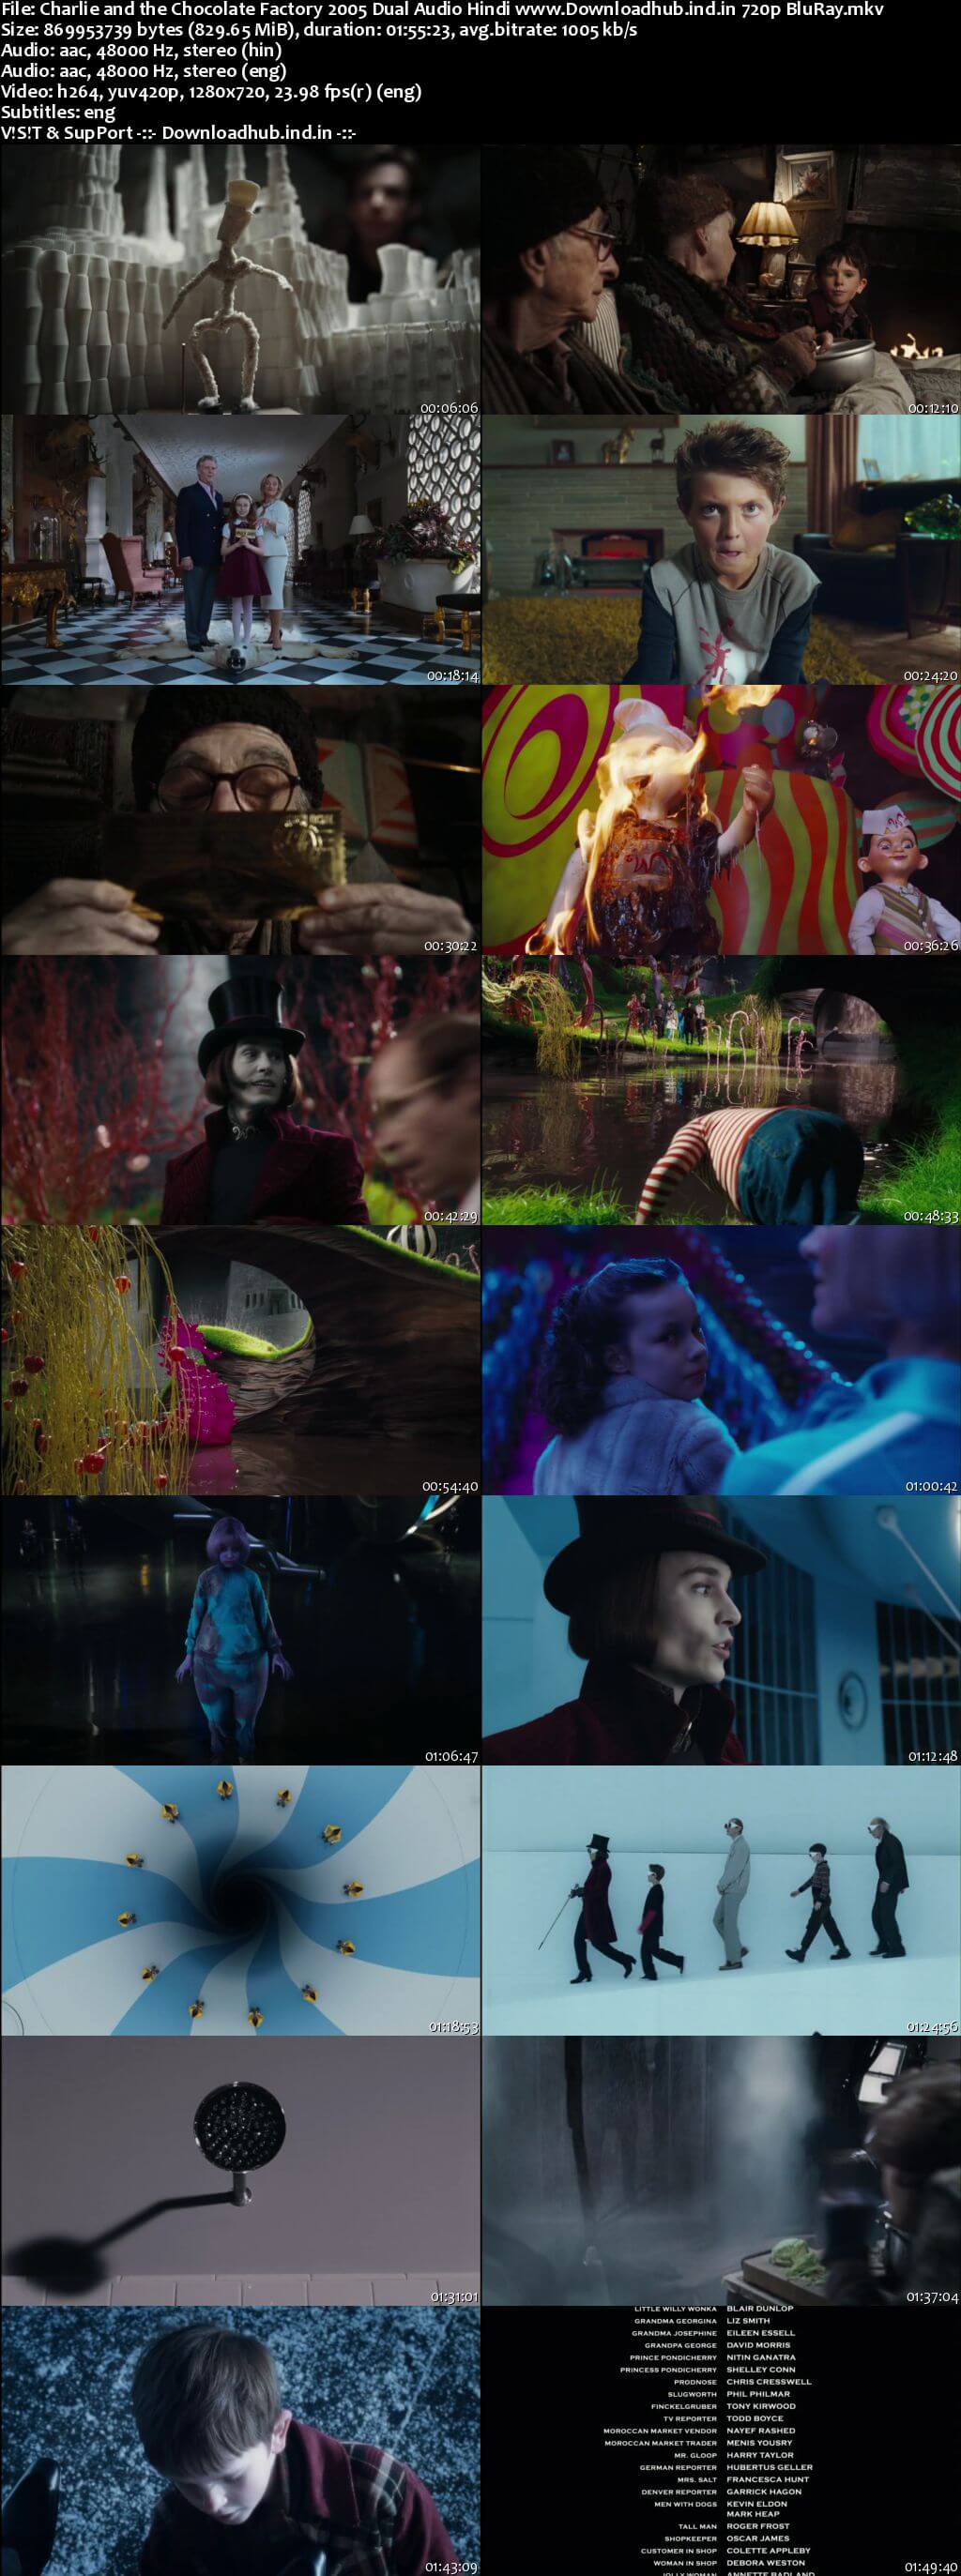 Charlie and the Chocolate Factory 2005 Hindi Dual Audio 720p BluRay ESubs